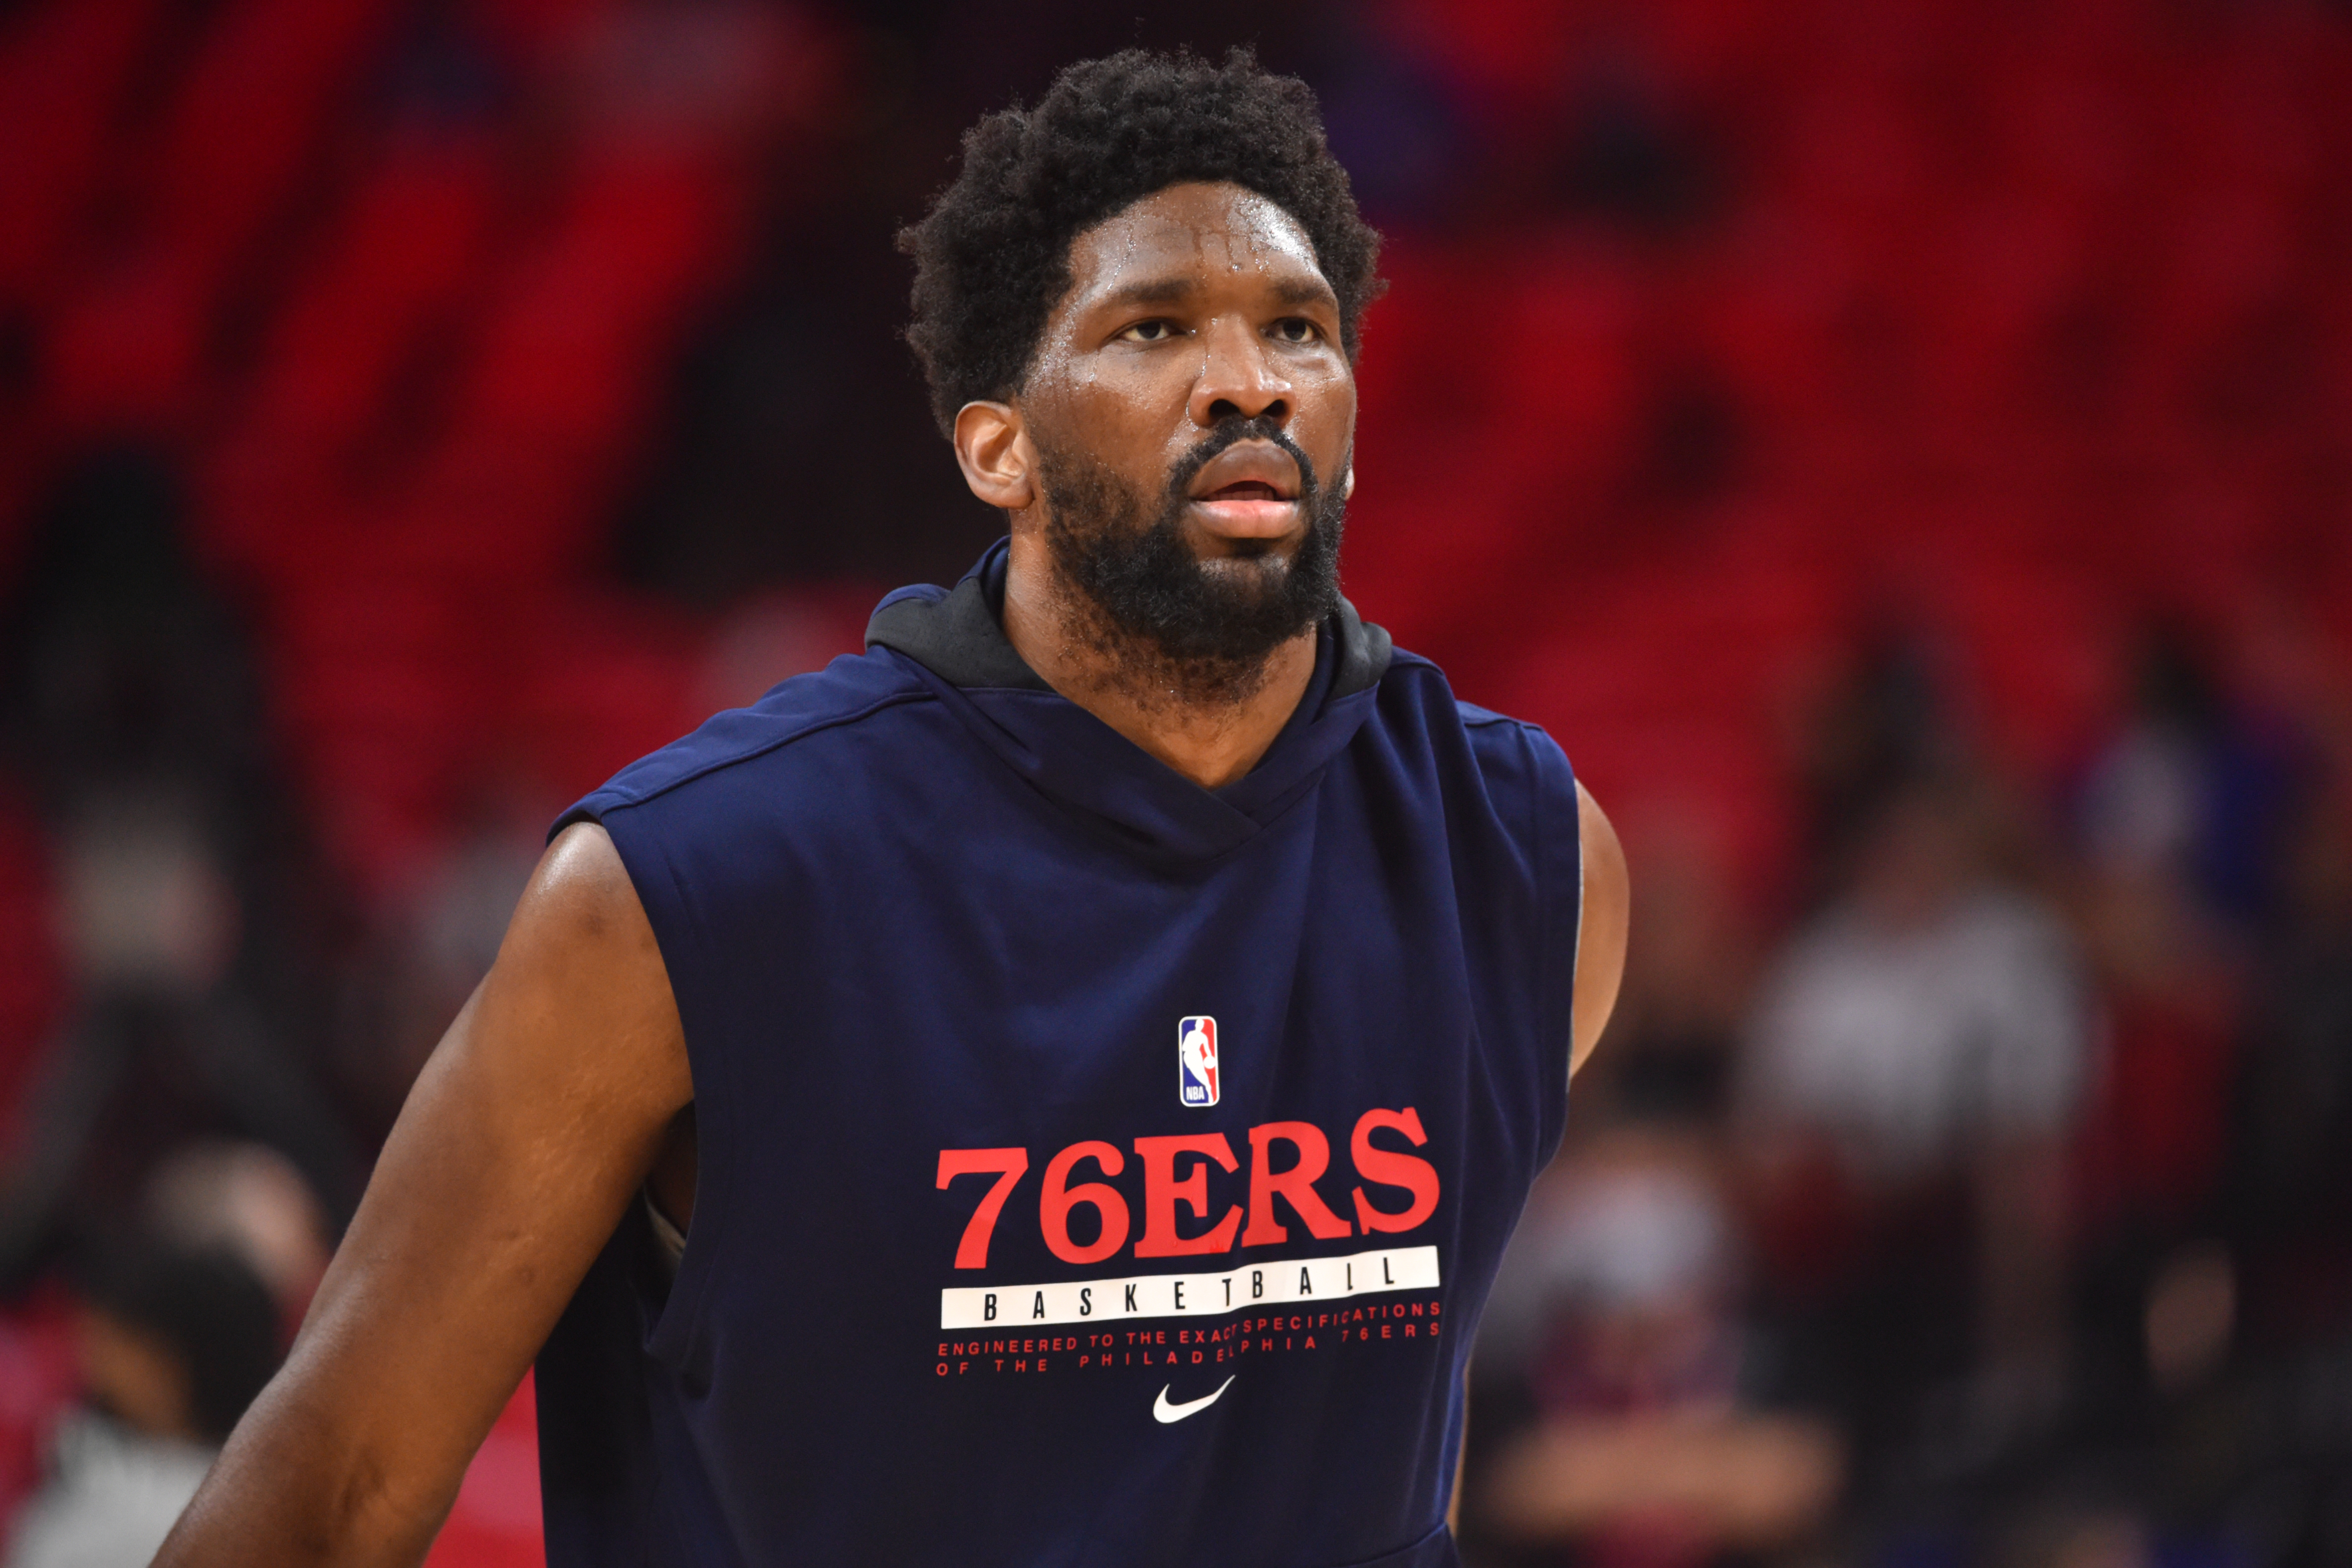 Triple H joins NBA All-Star Joel Embiid to ring 76ers' Liberty Bell 